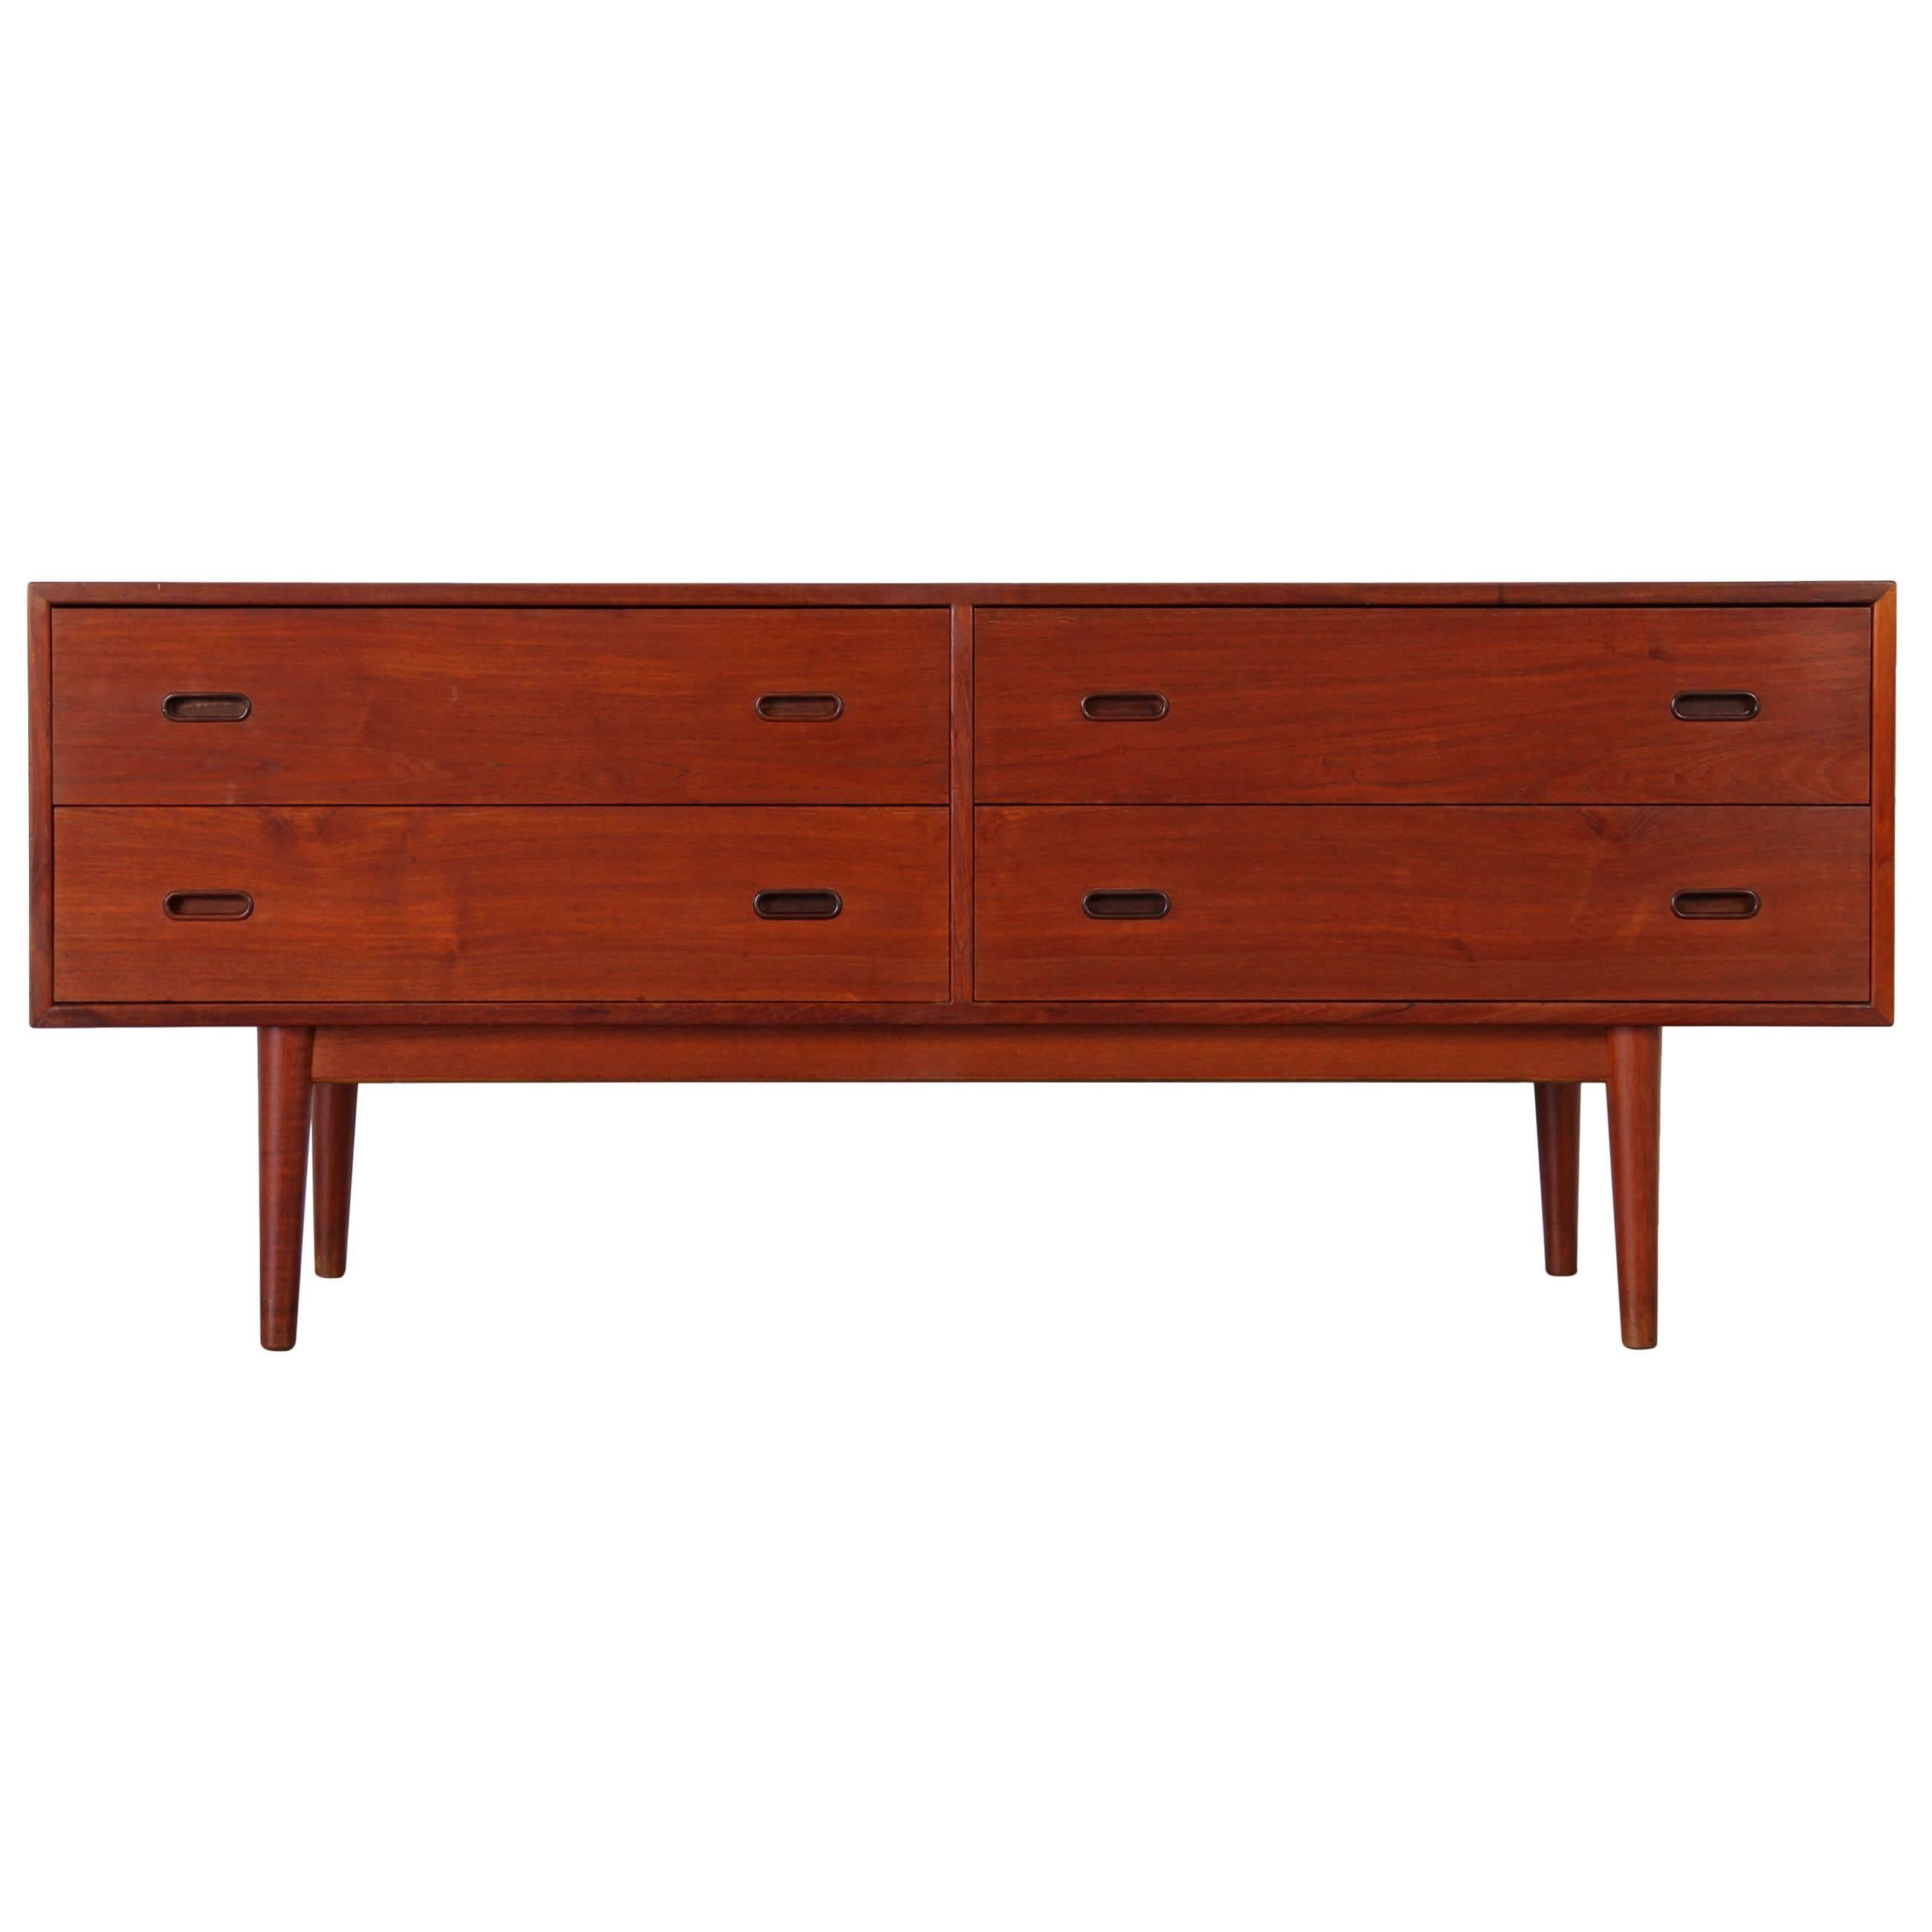 Rare Chest of Drawers by Arne Vodder, Produced by Sibast